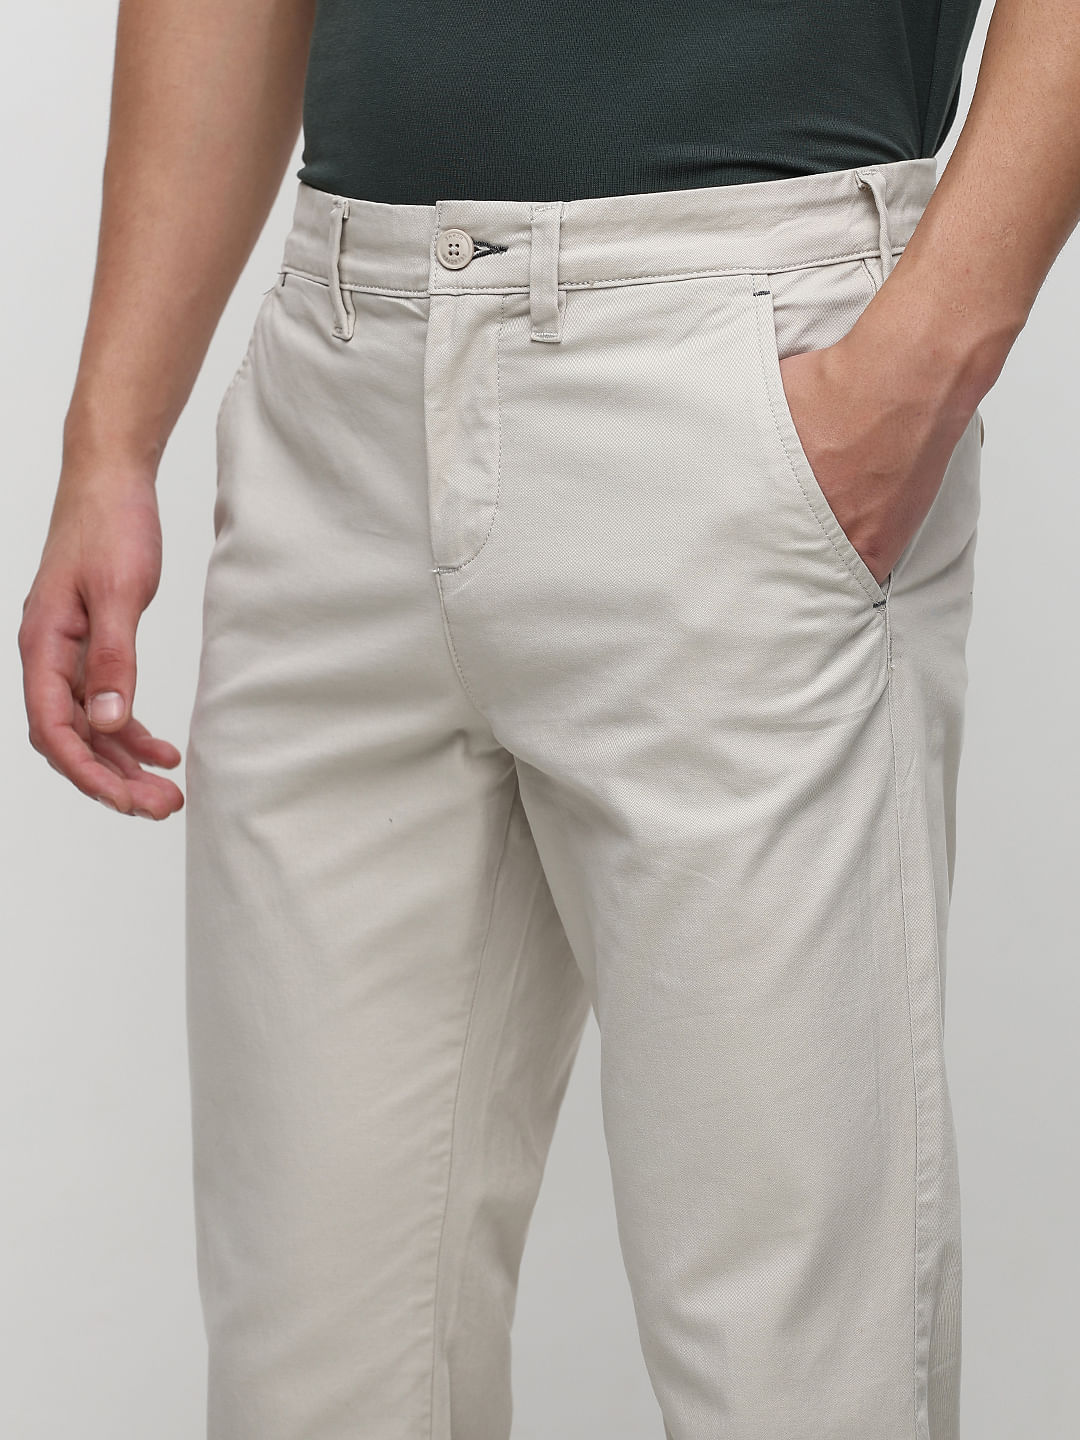 Men Off White Trousers - Buy Men Off White Trousers online in India